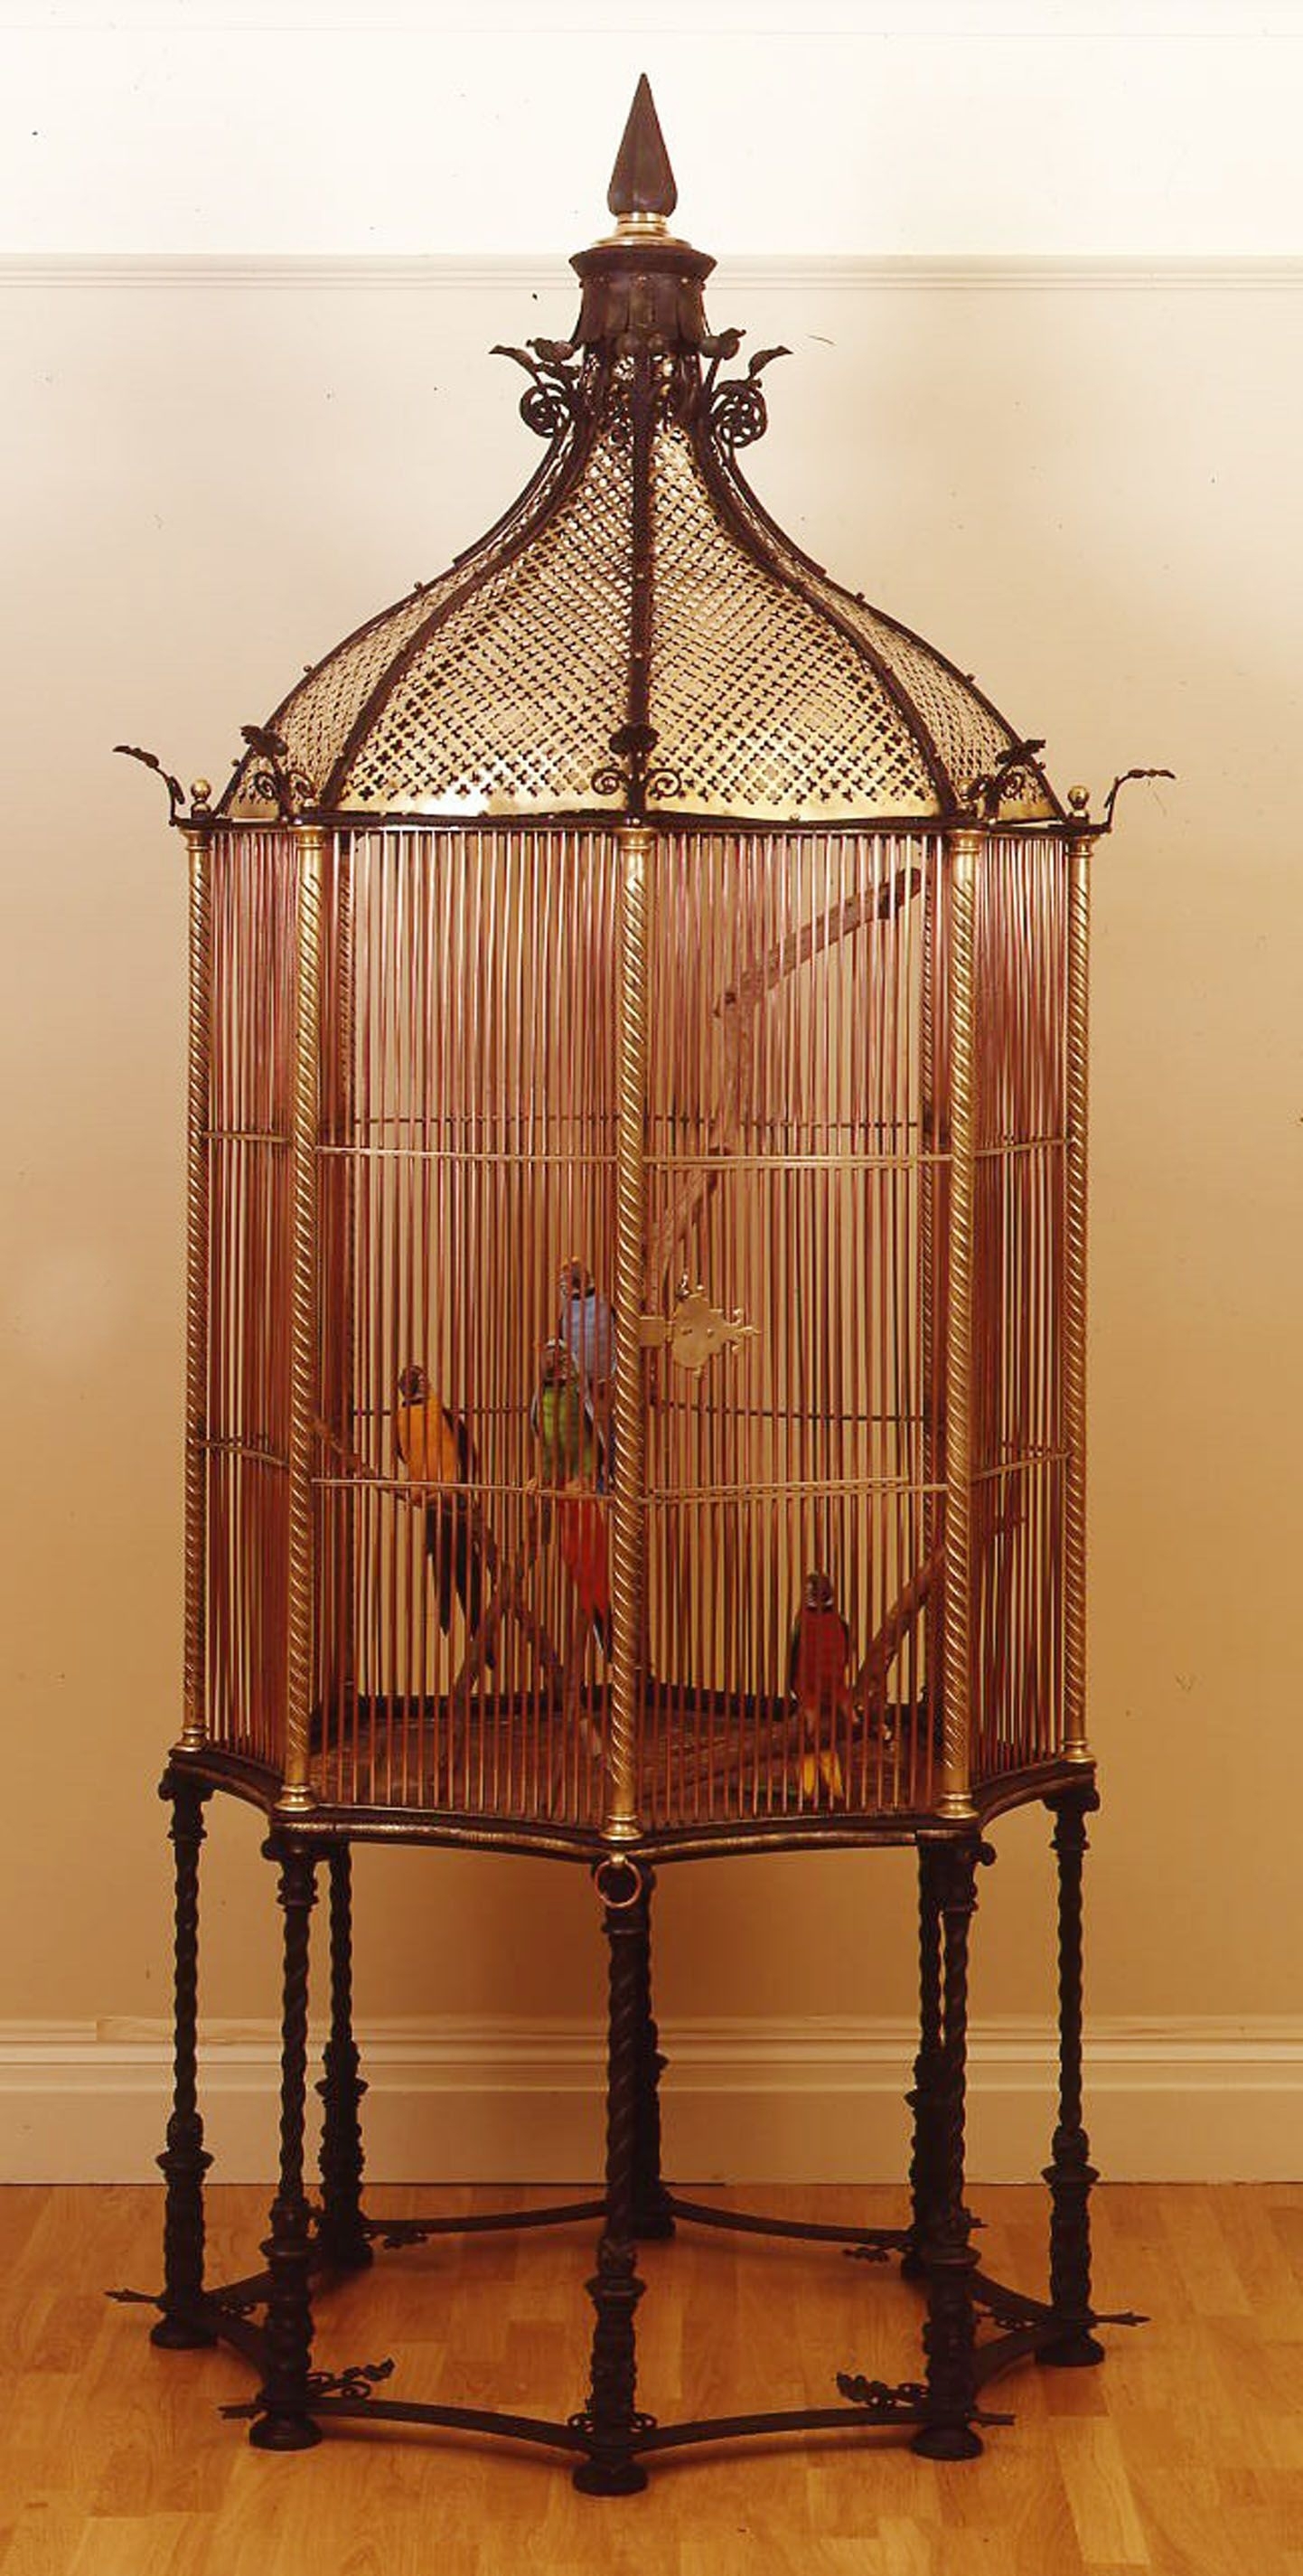 Vintage Victorian Styled White Decorative Wood and Metal Bird Cage